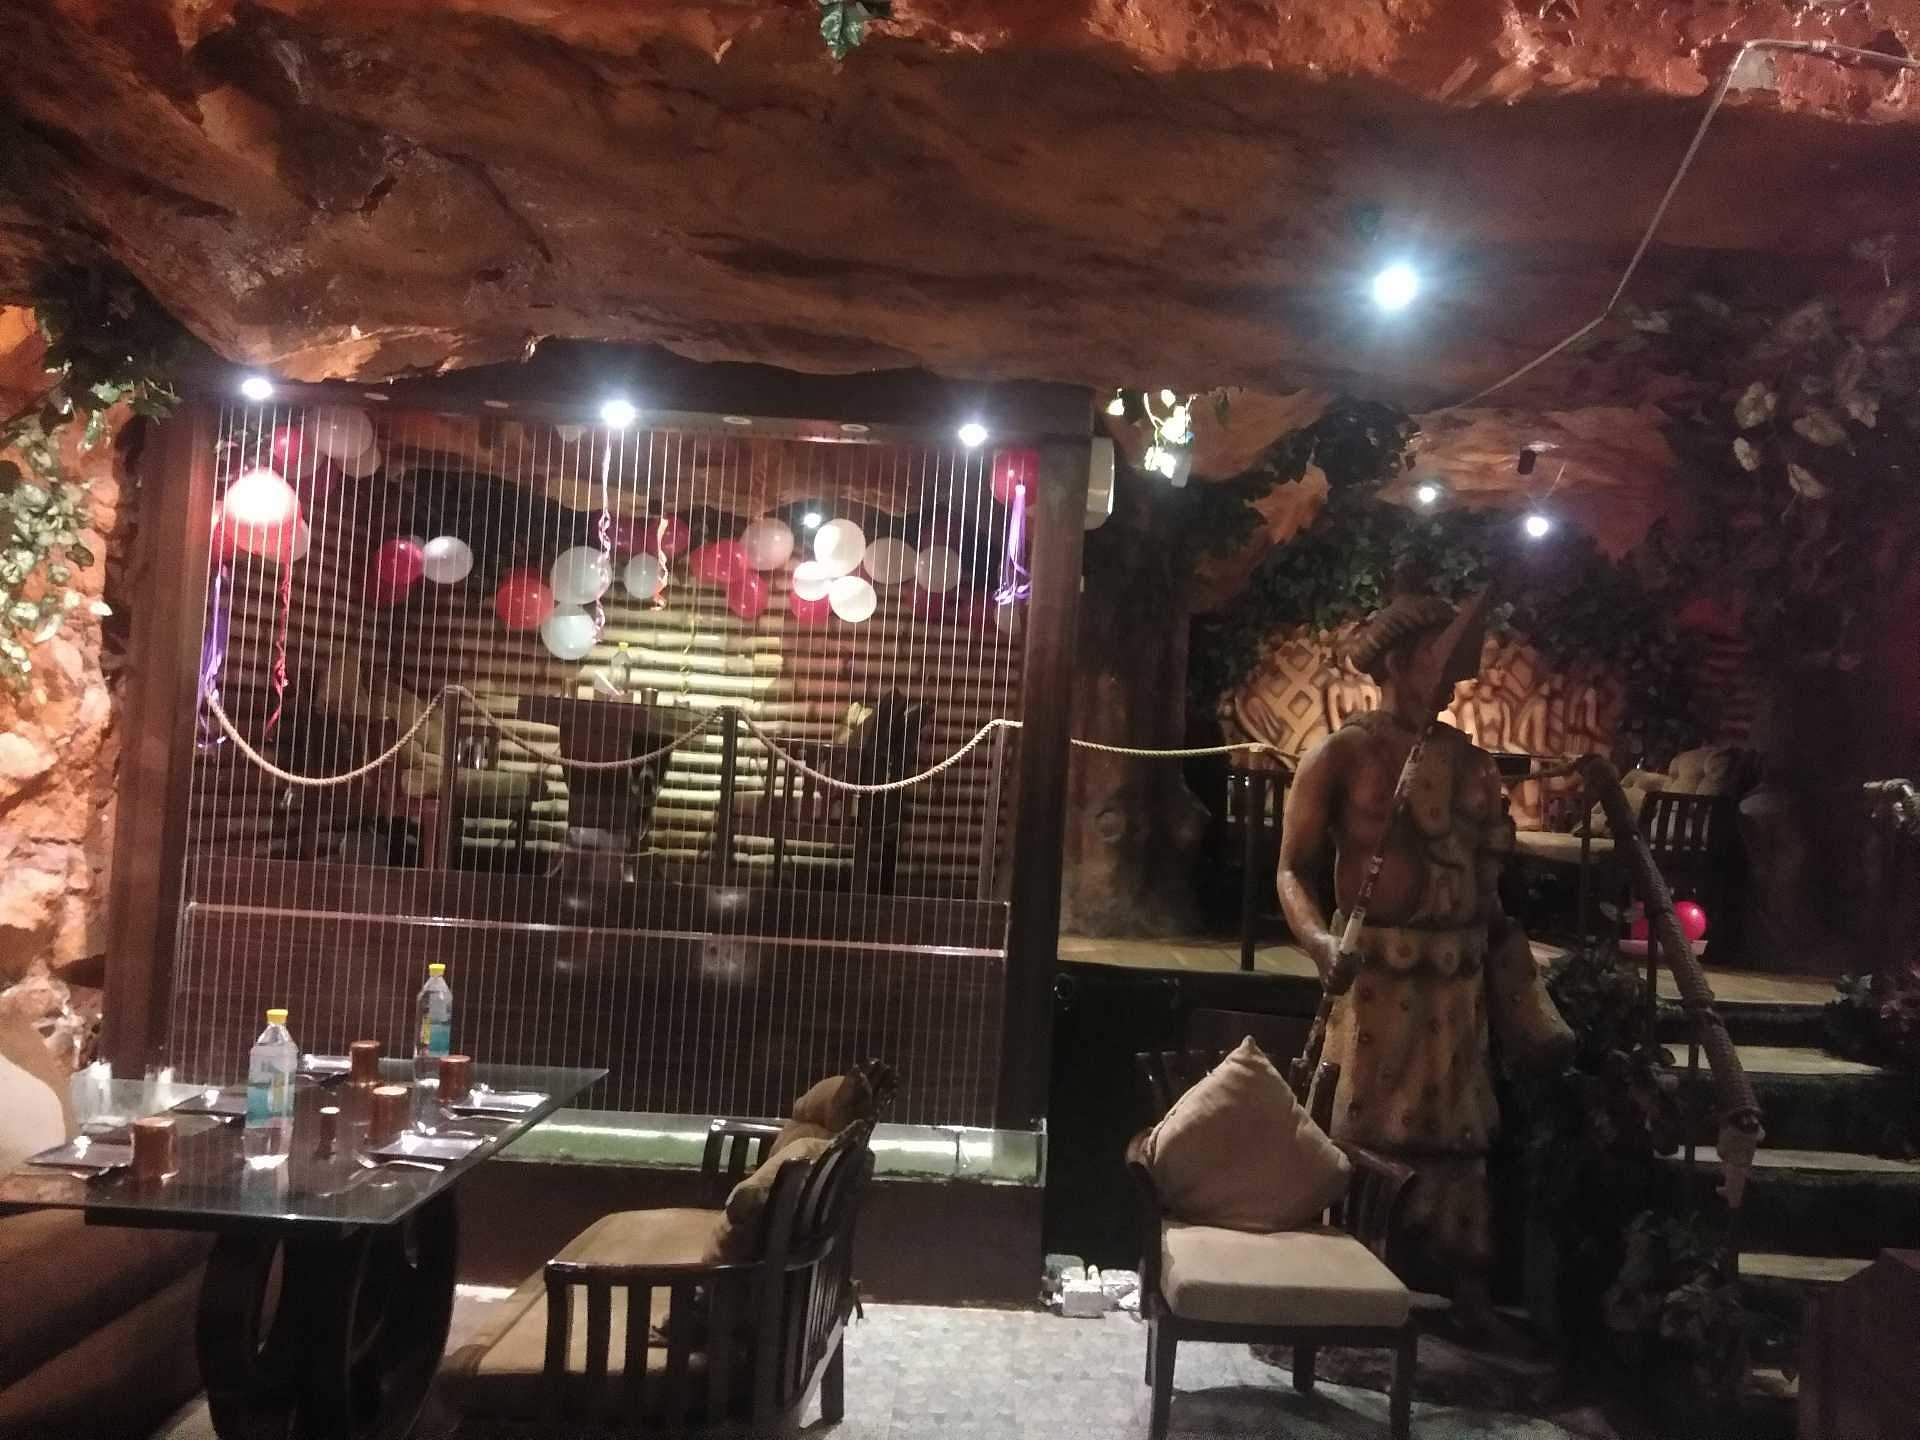 Spice Caves in Gomti Nagar, Lucknow